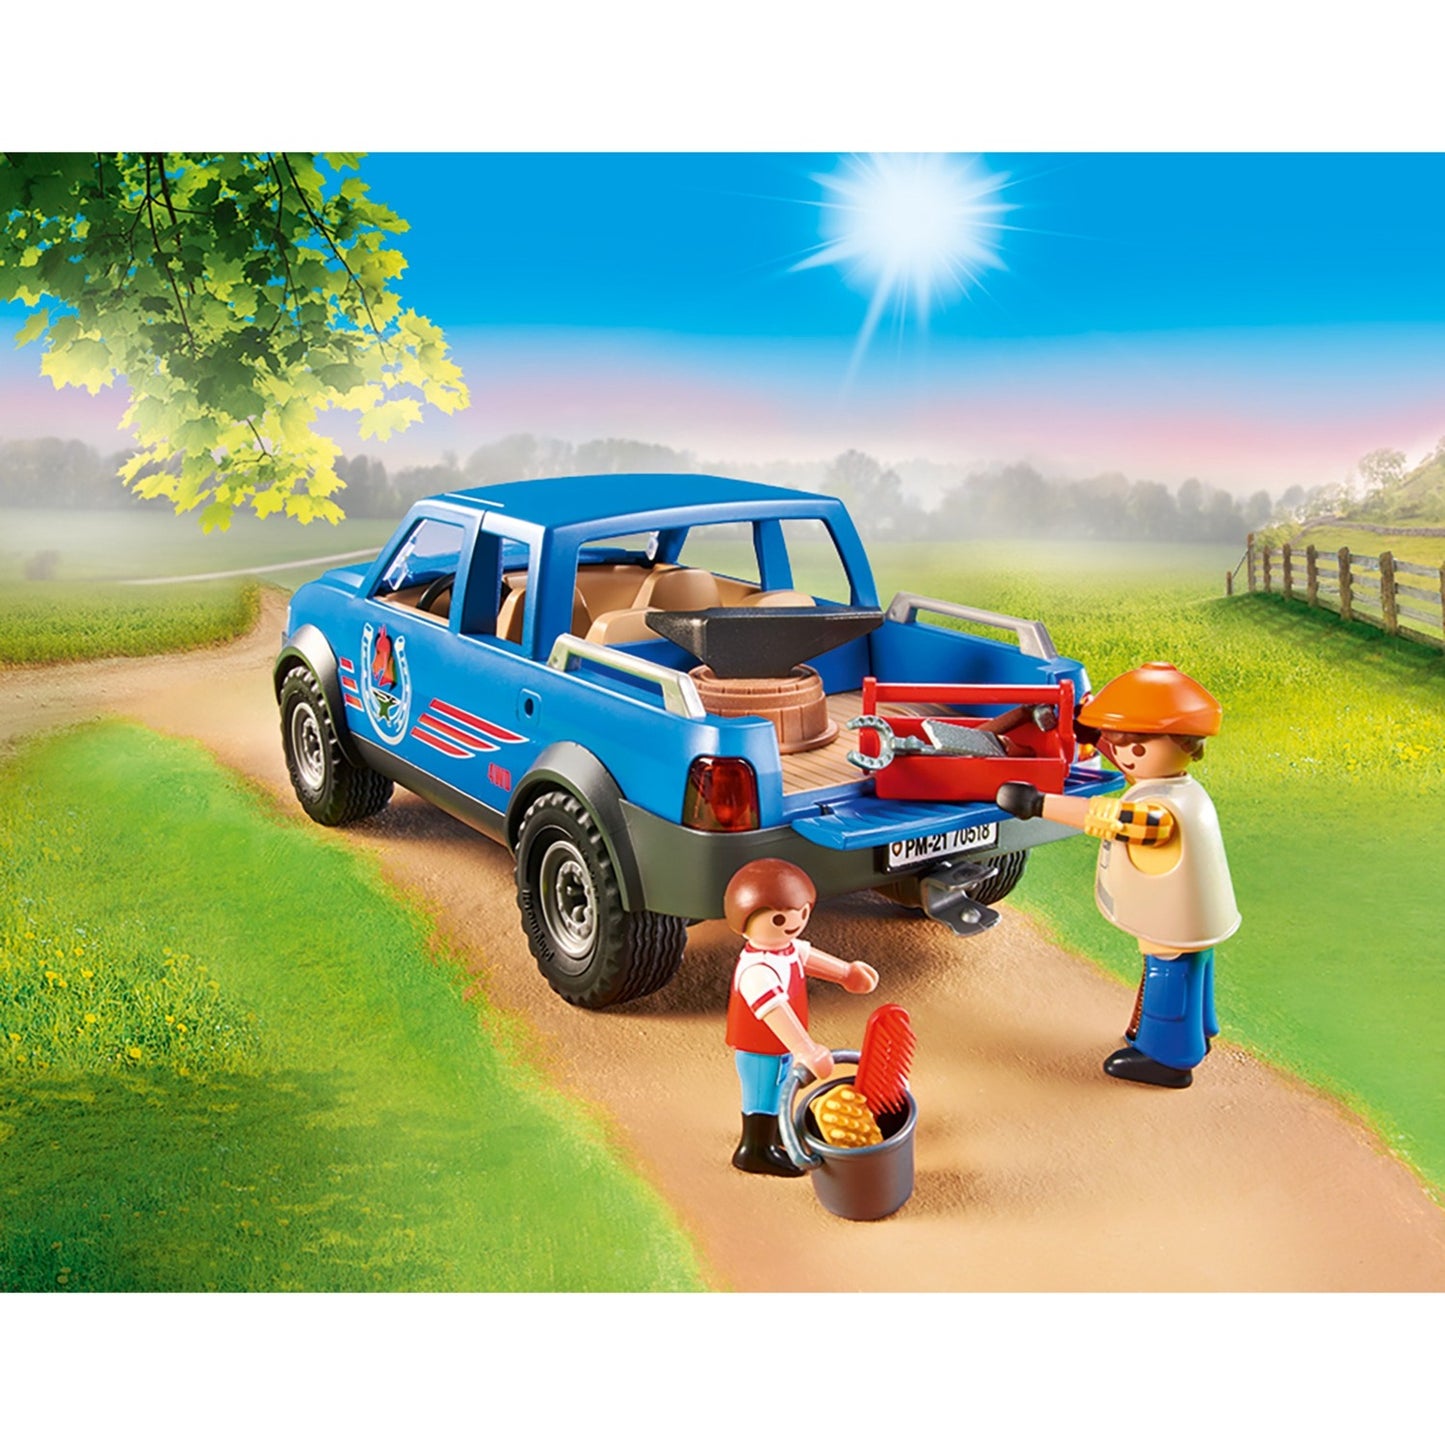 PlayMobil Country Mobile Hoefsmid